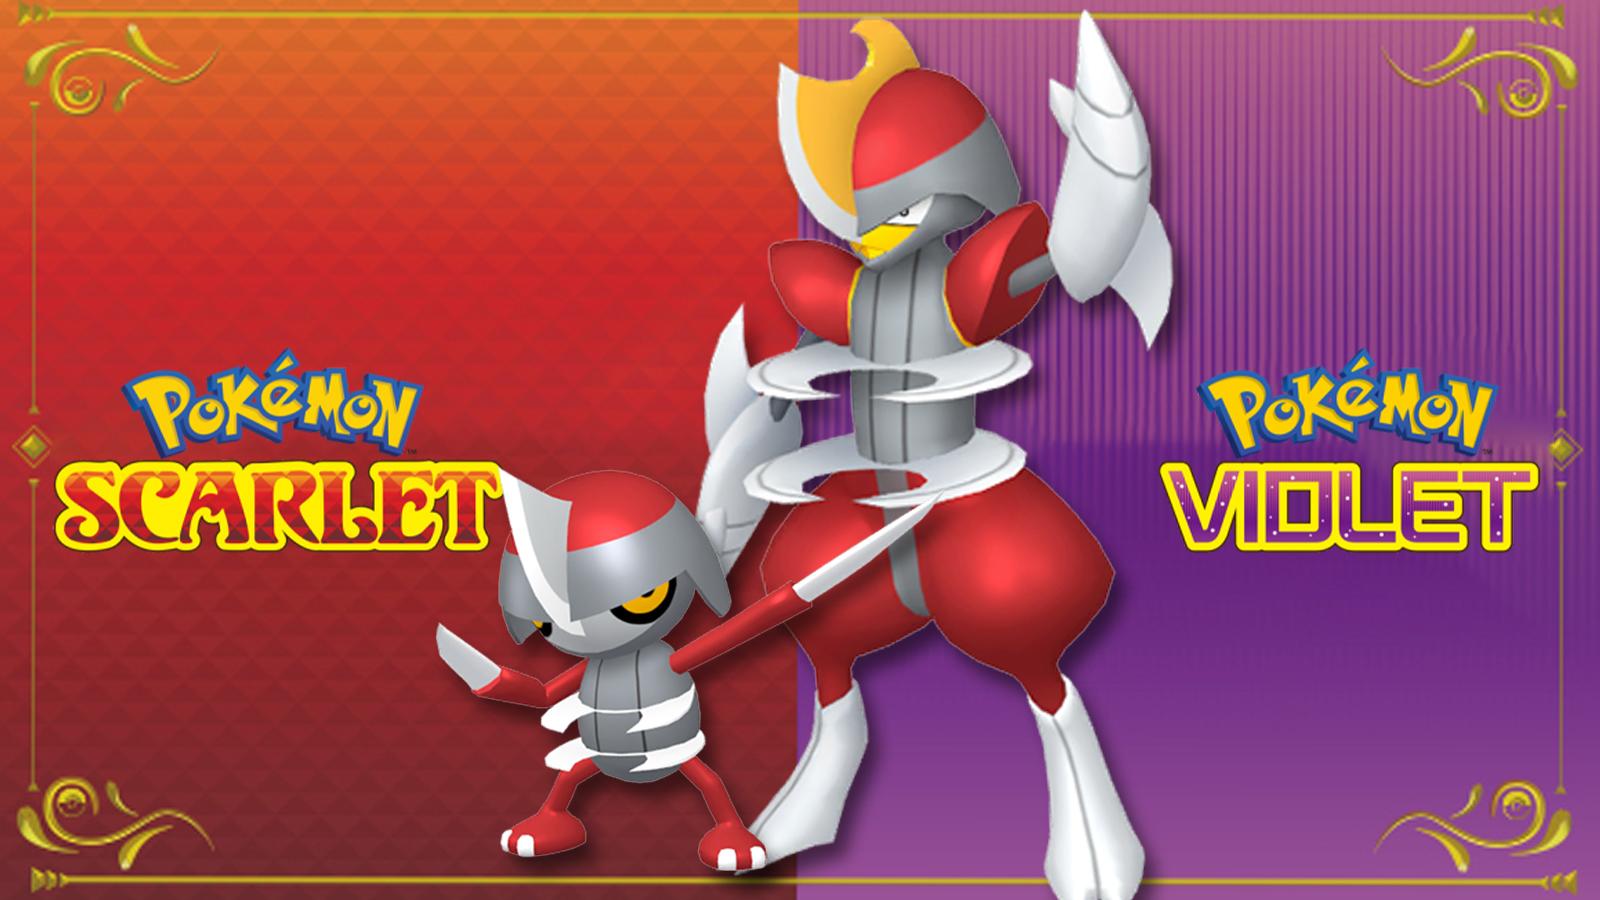 Kingambit weaknesses and best counters in Pokémon Scarlet and Violet